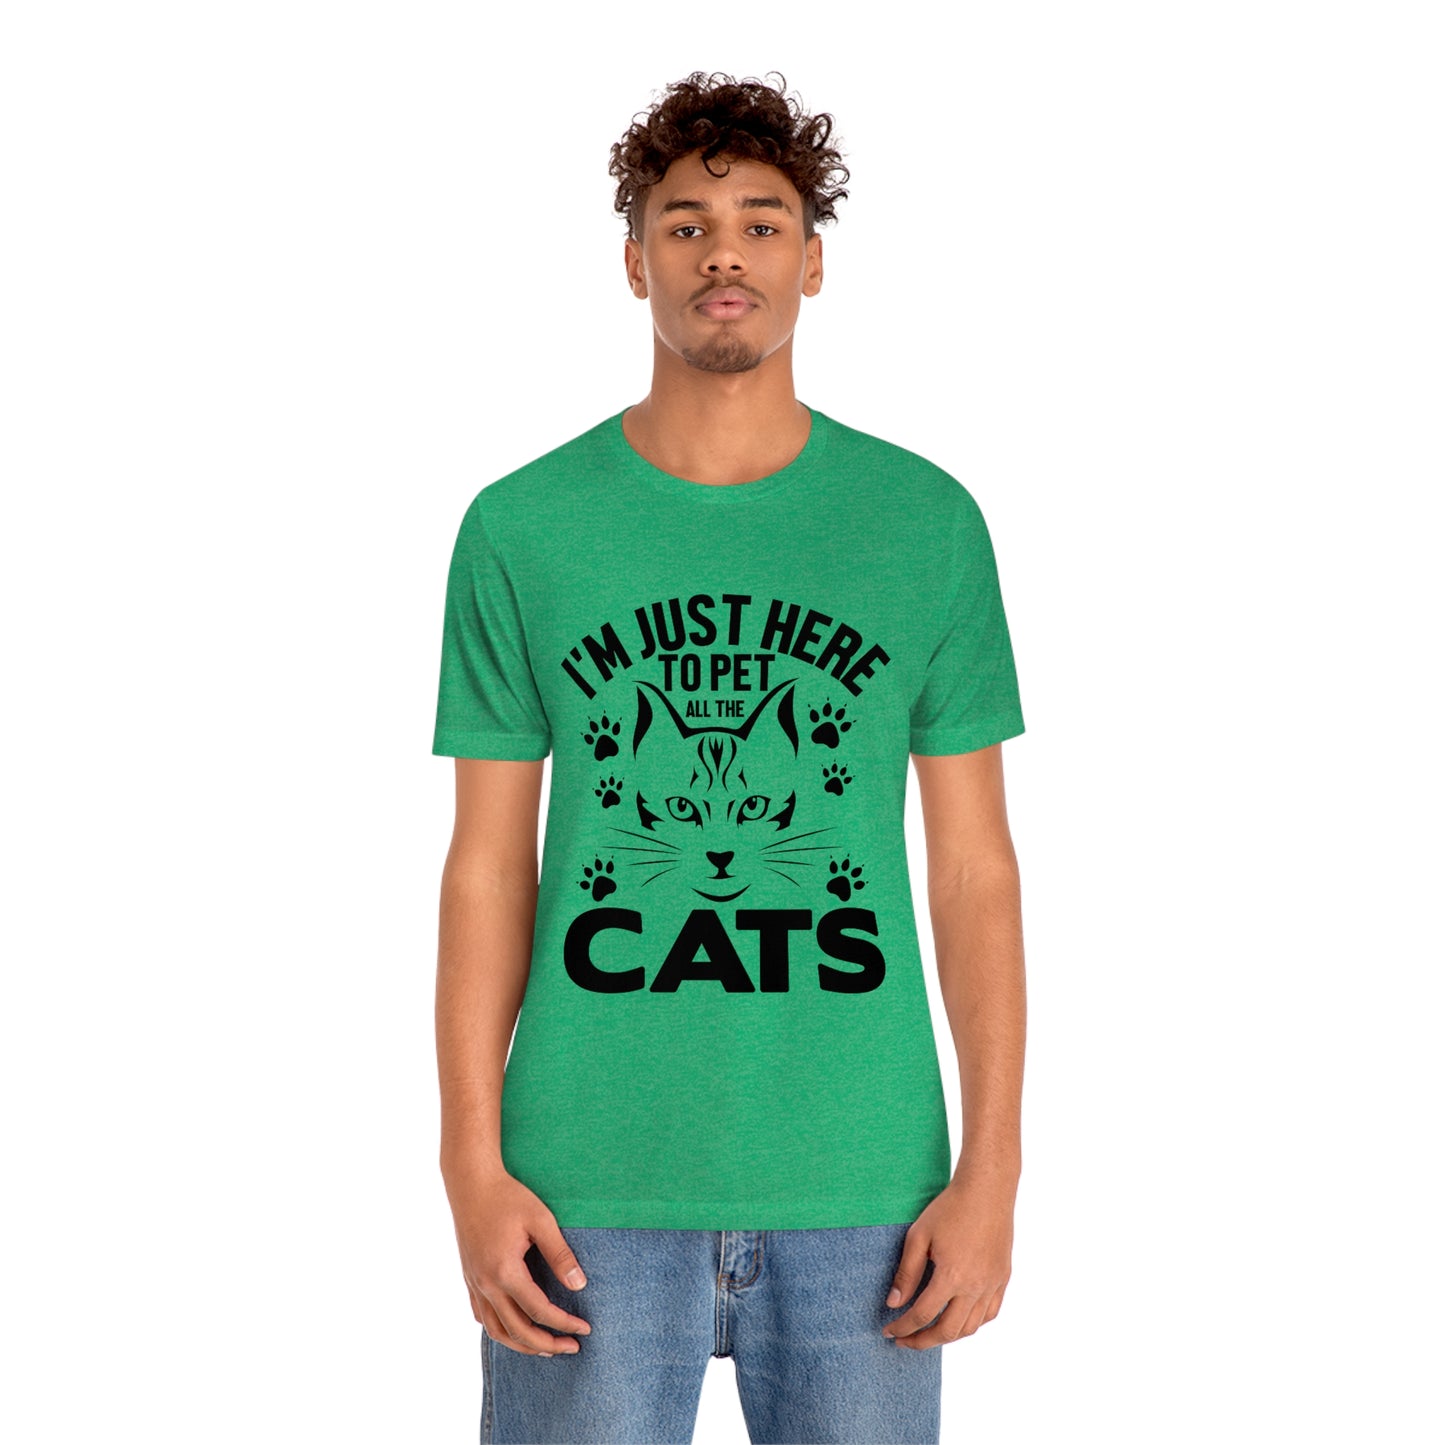 I'm Just Here To Pet All The Cats - Unisex T-Shirt